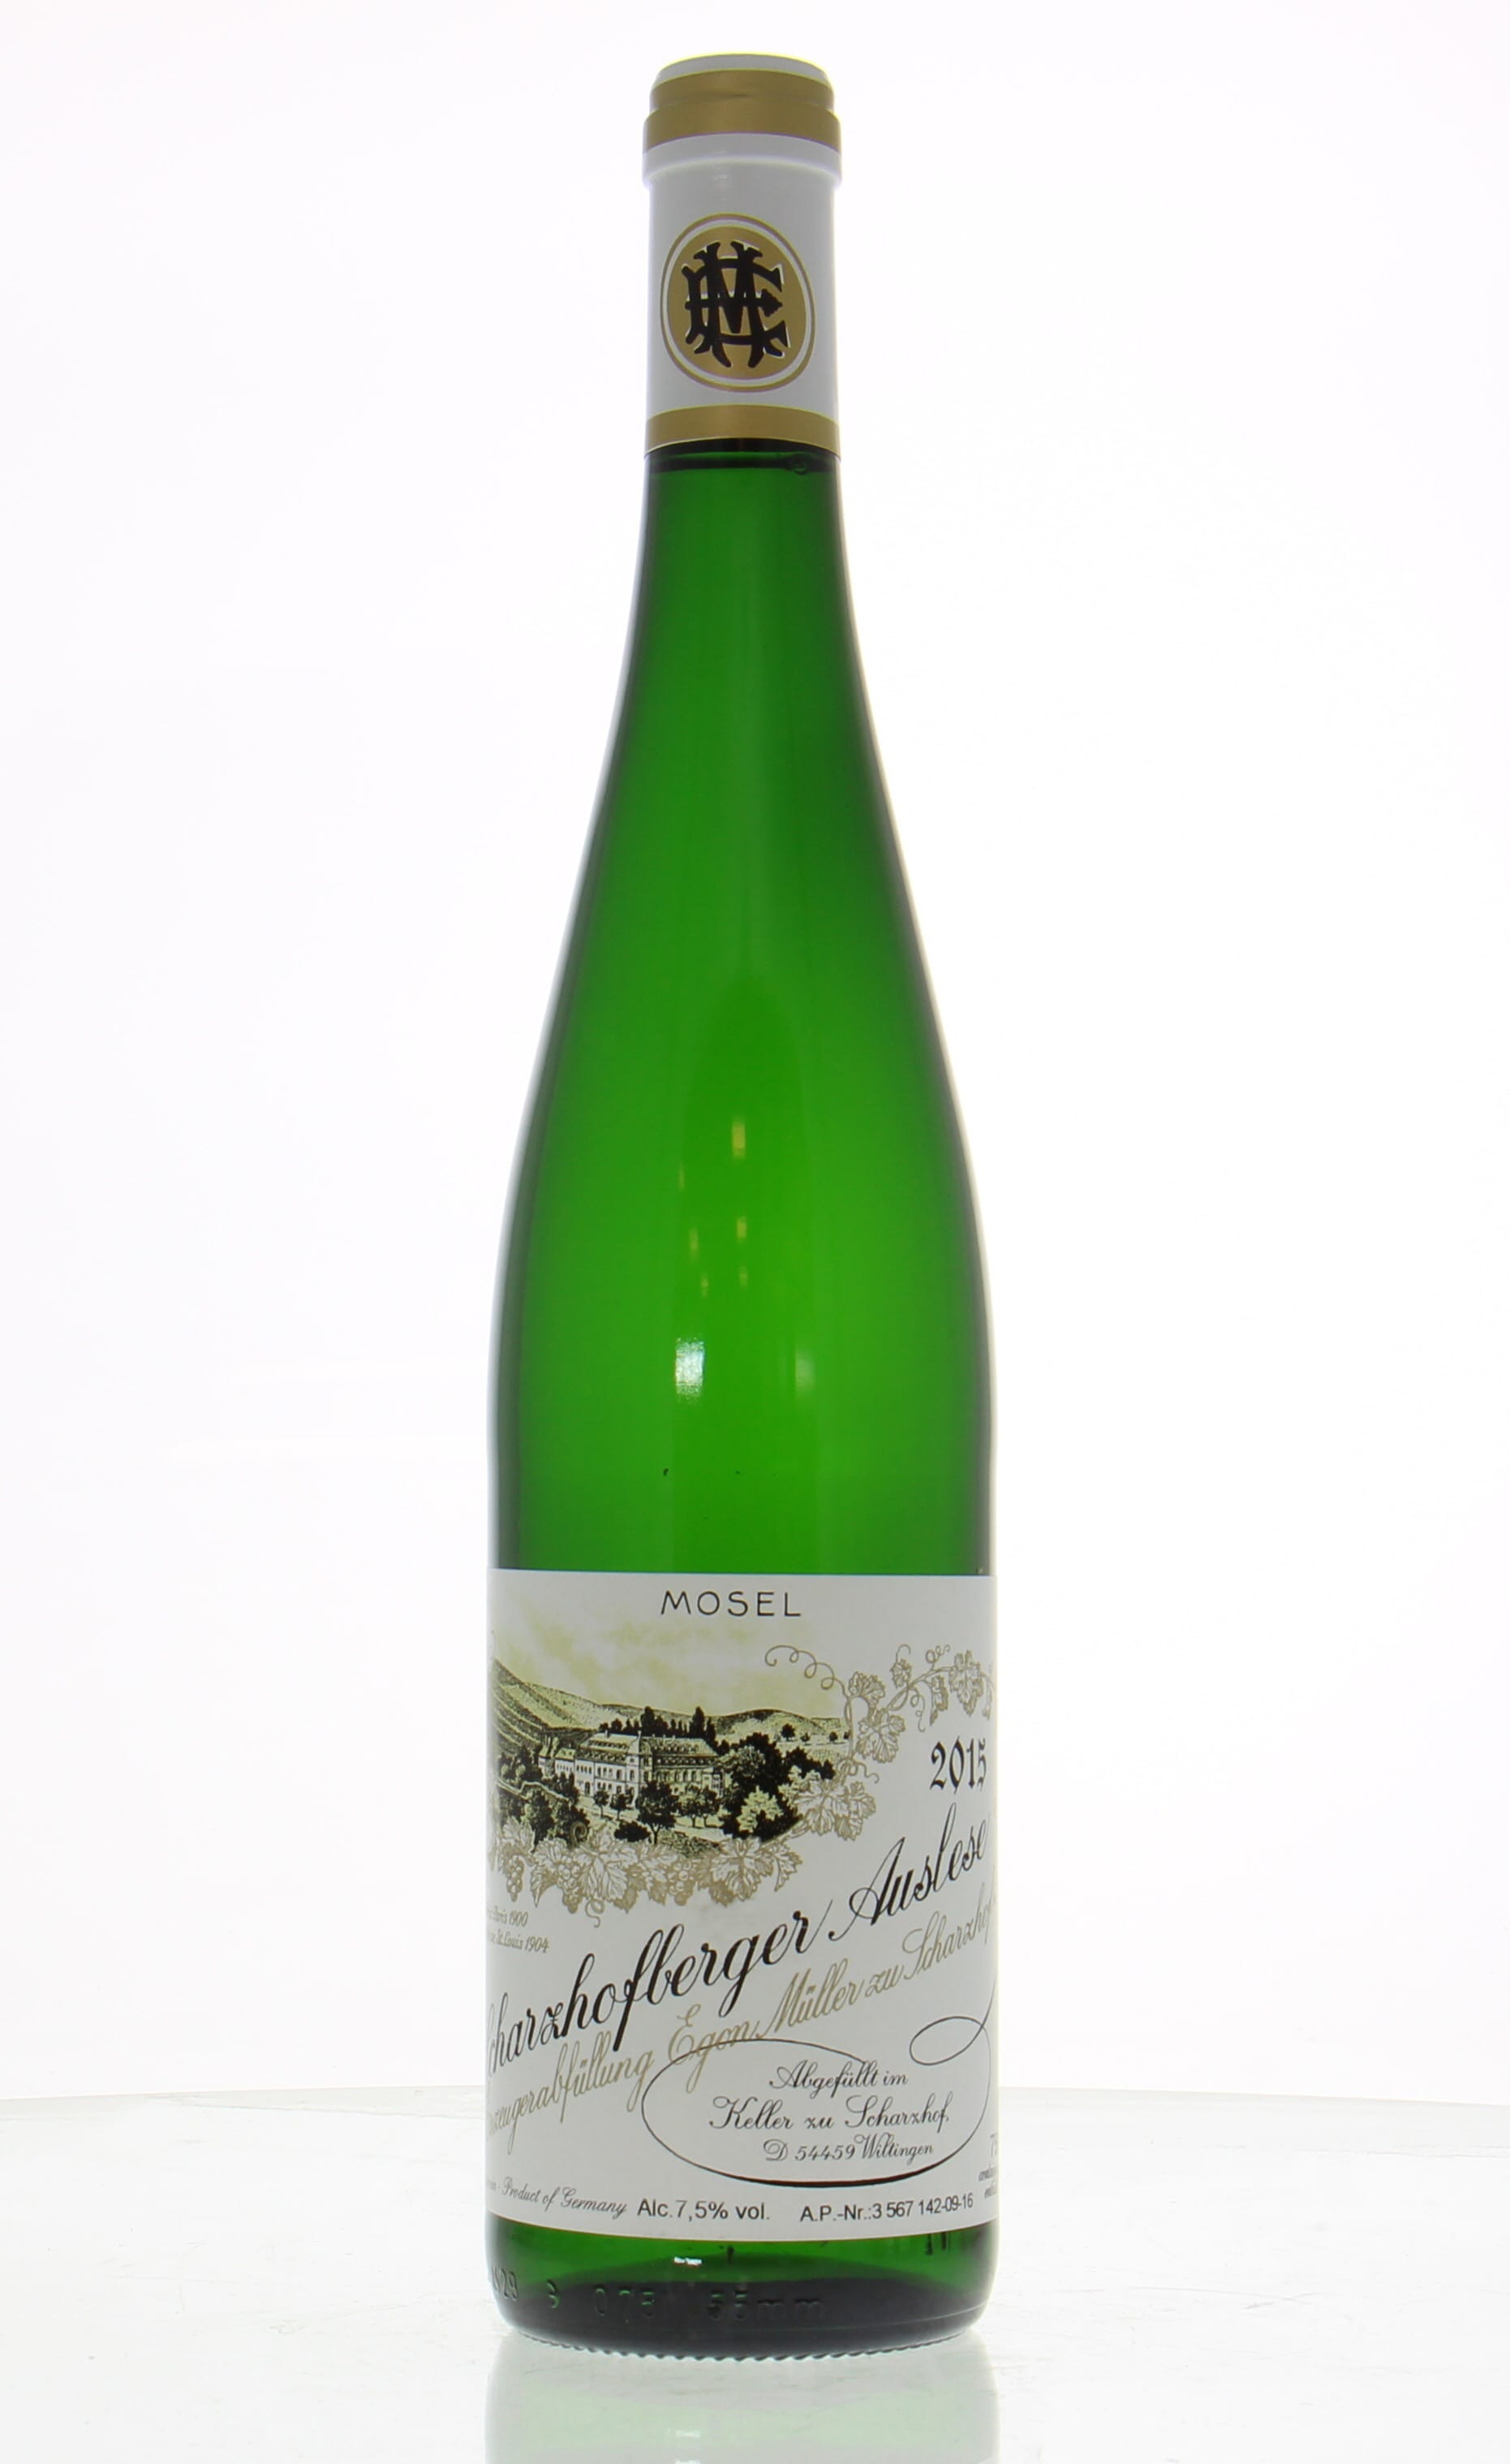 Egon Muller - Scharzhofberger Riesling Auslese 2015 Perfect